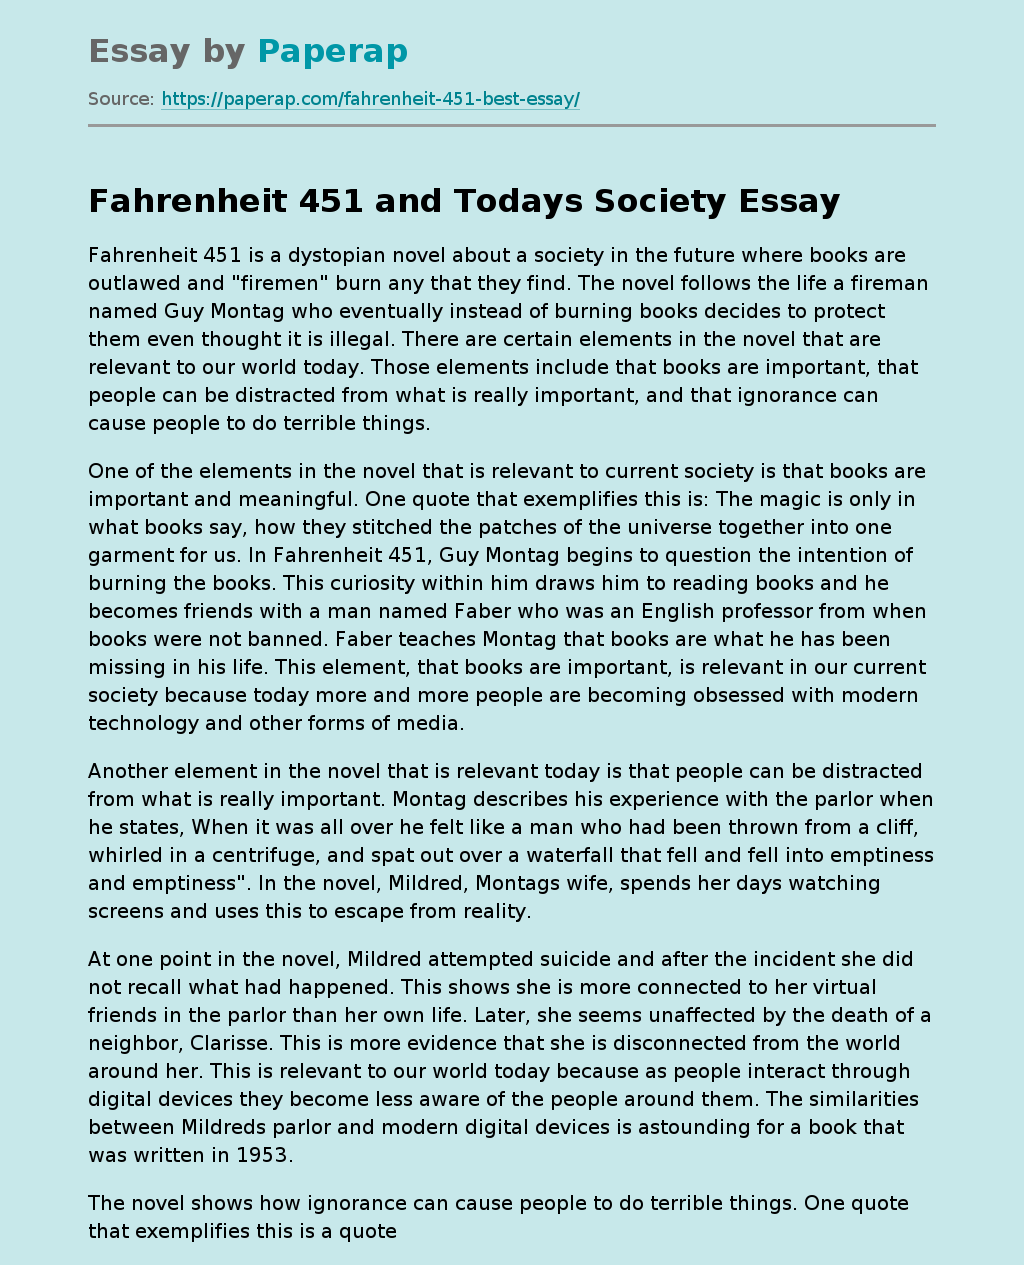 compare and contrast fahrenheit 451 and modern society essay